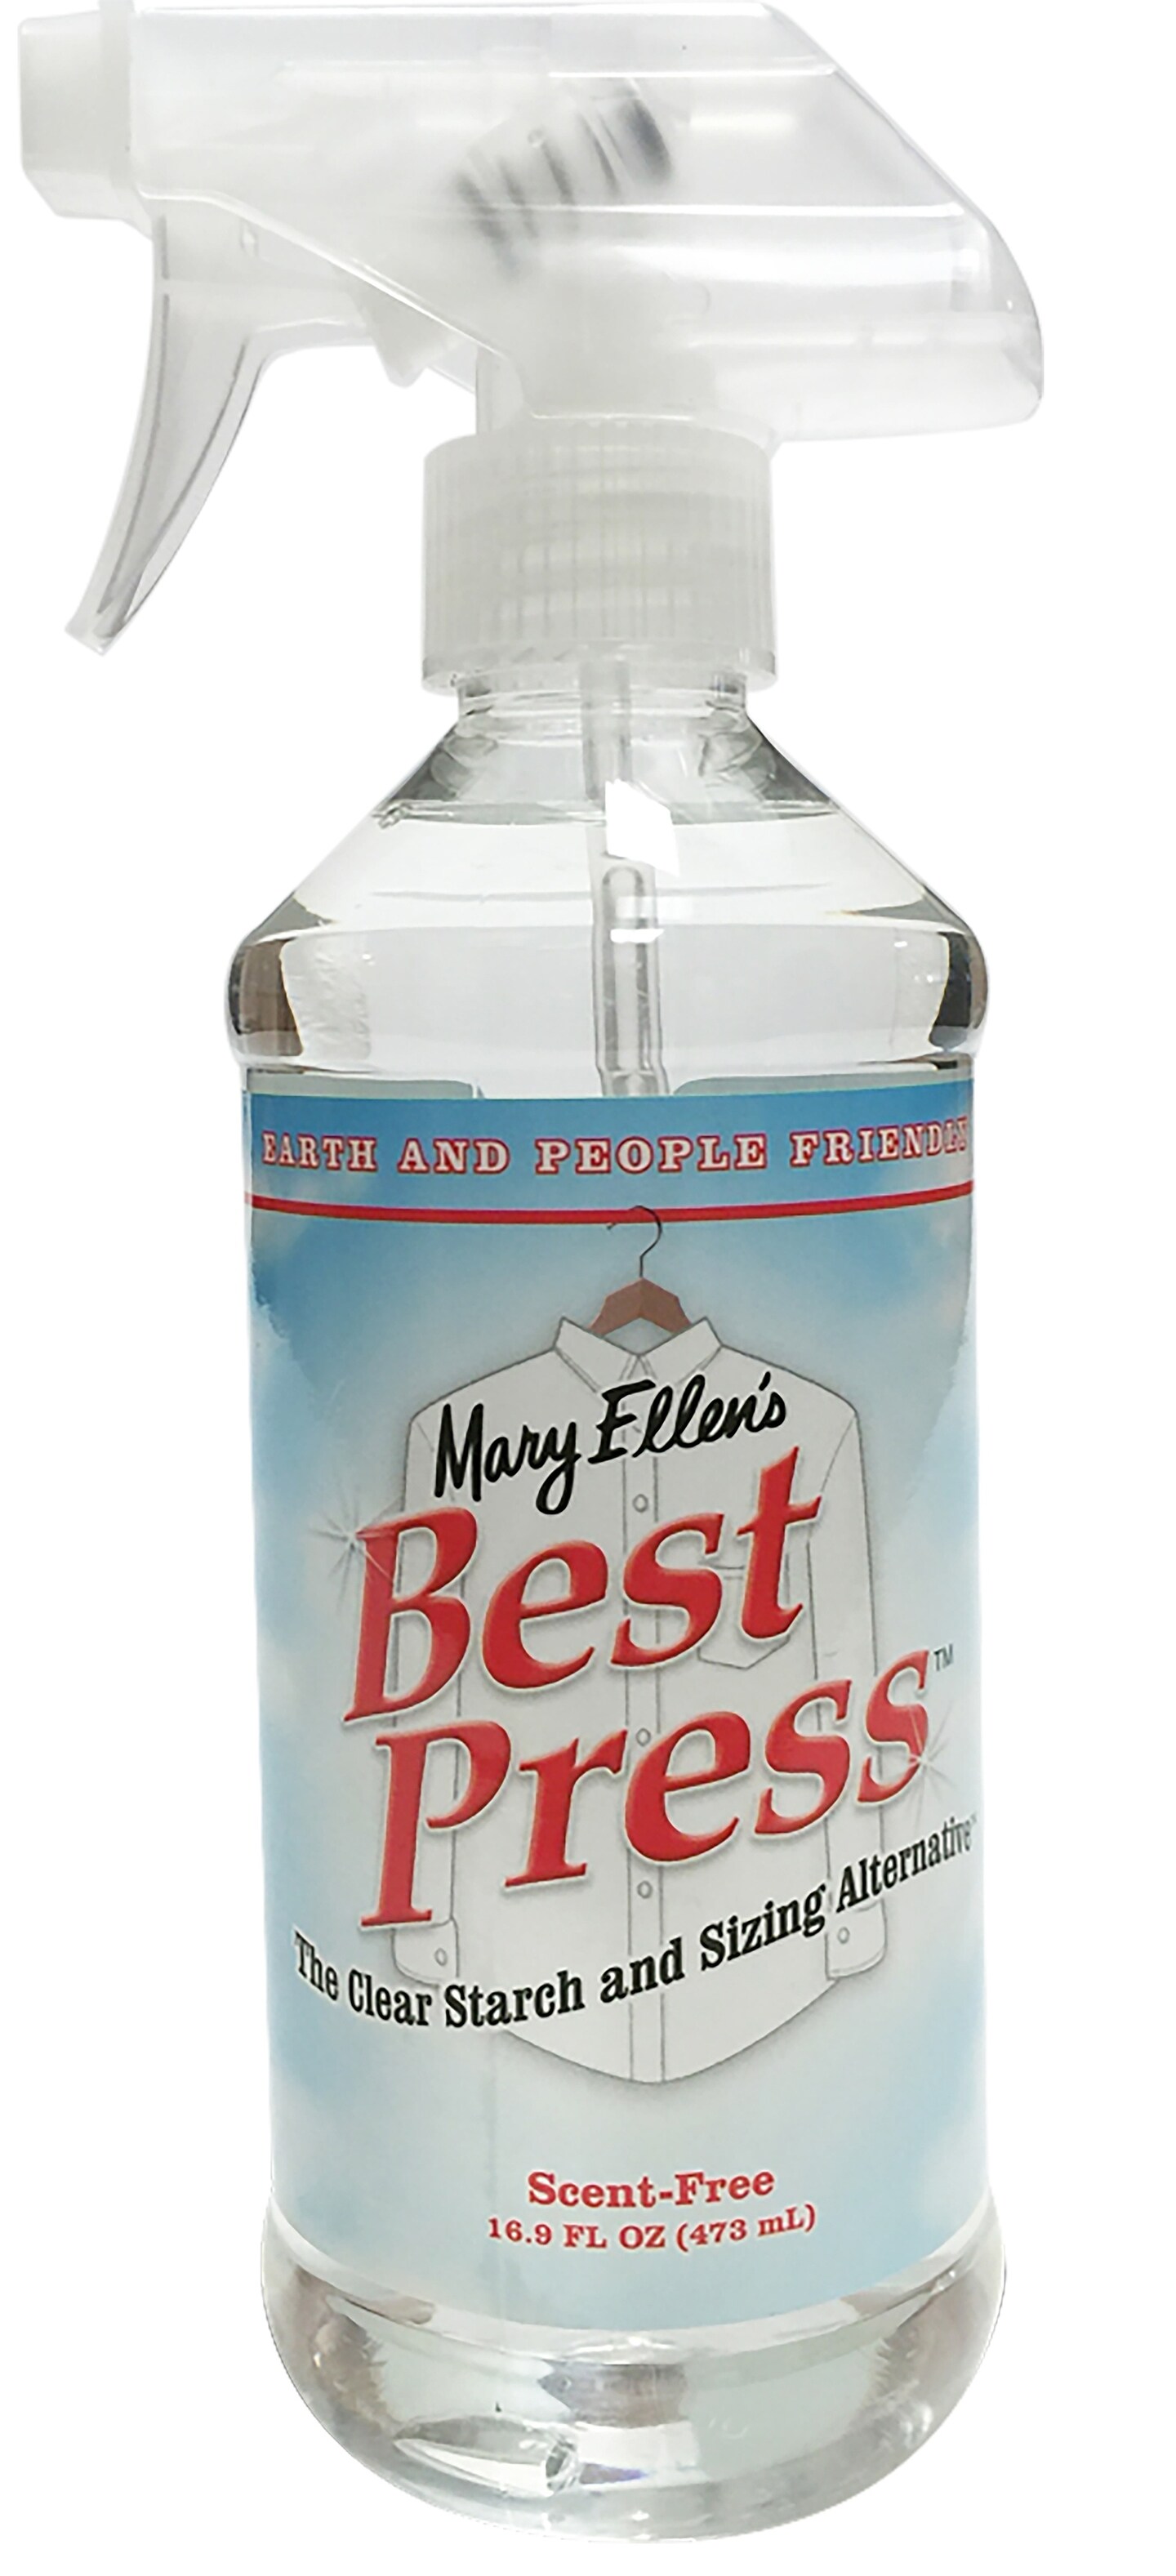 Good press. Pressure Clear. Best Clear product.